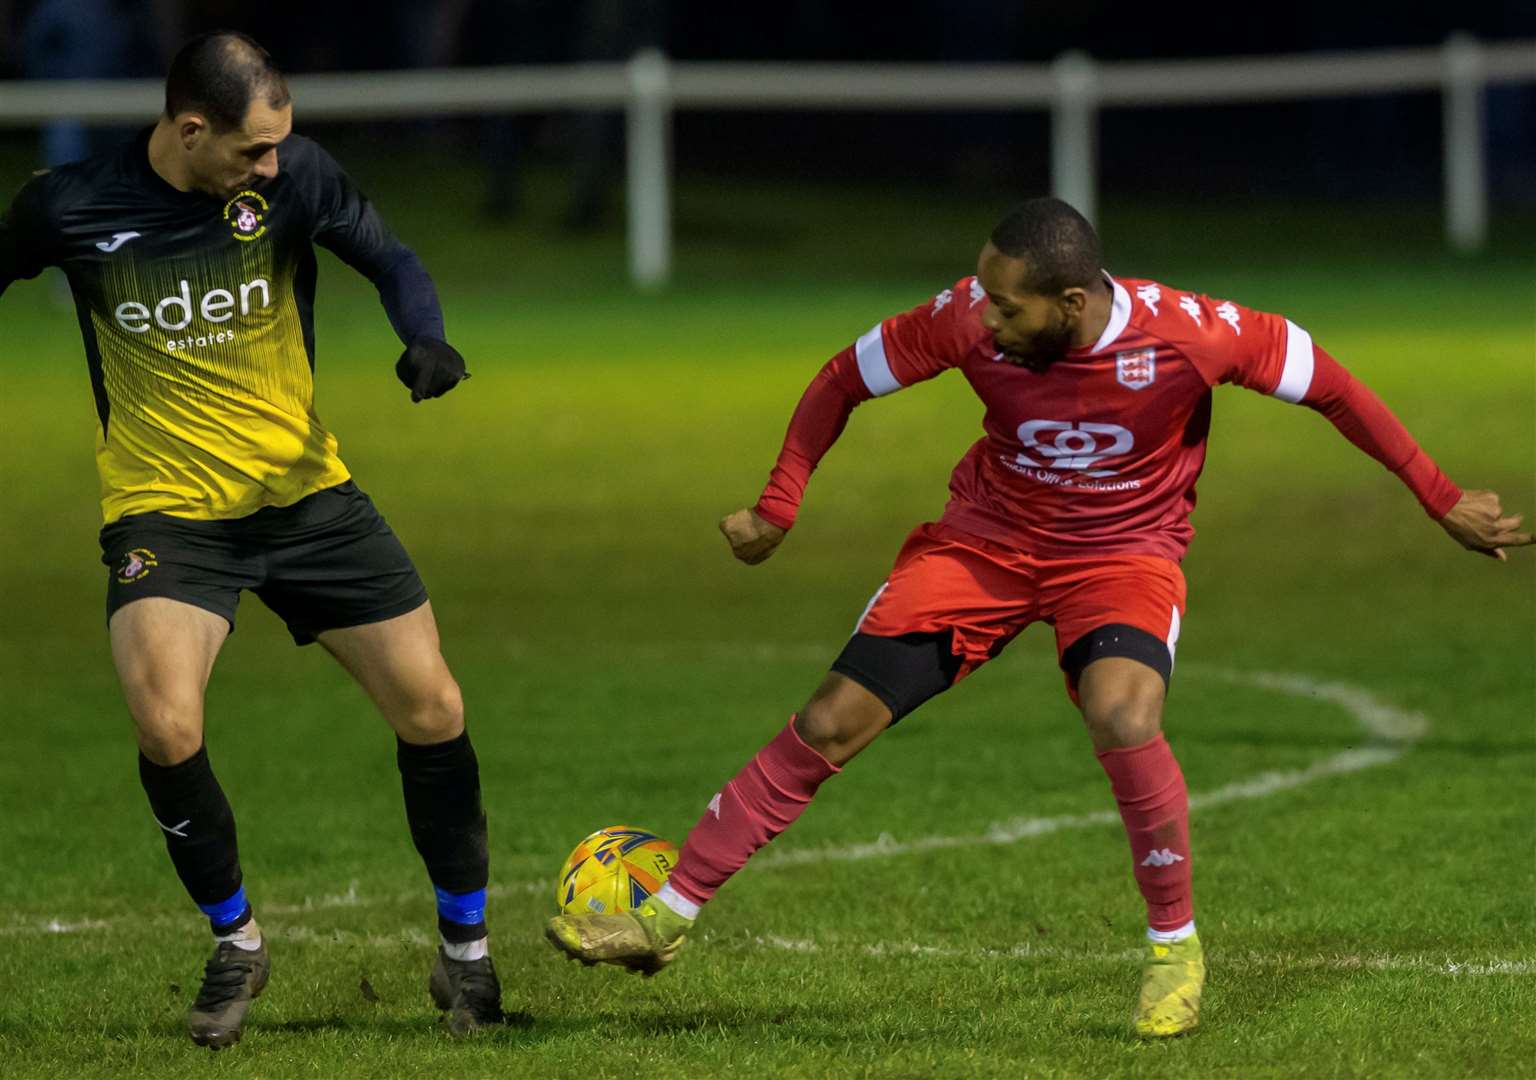 Kieron Campbell, of Faversham, tries to get the ball past Larkfield & New Hythe's Jack Sammoutis. Picture: Ian Scammell